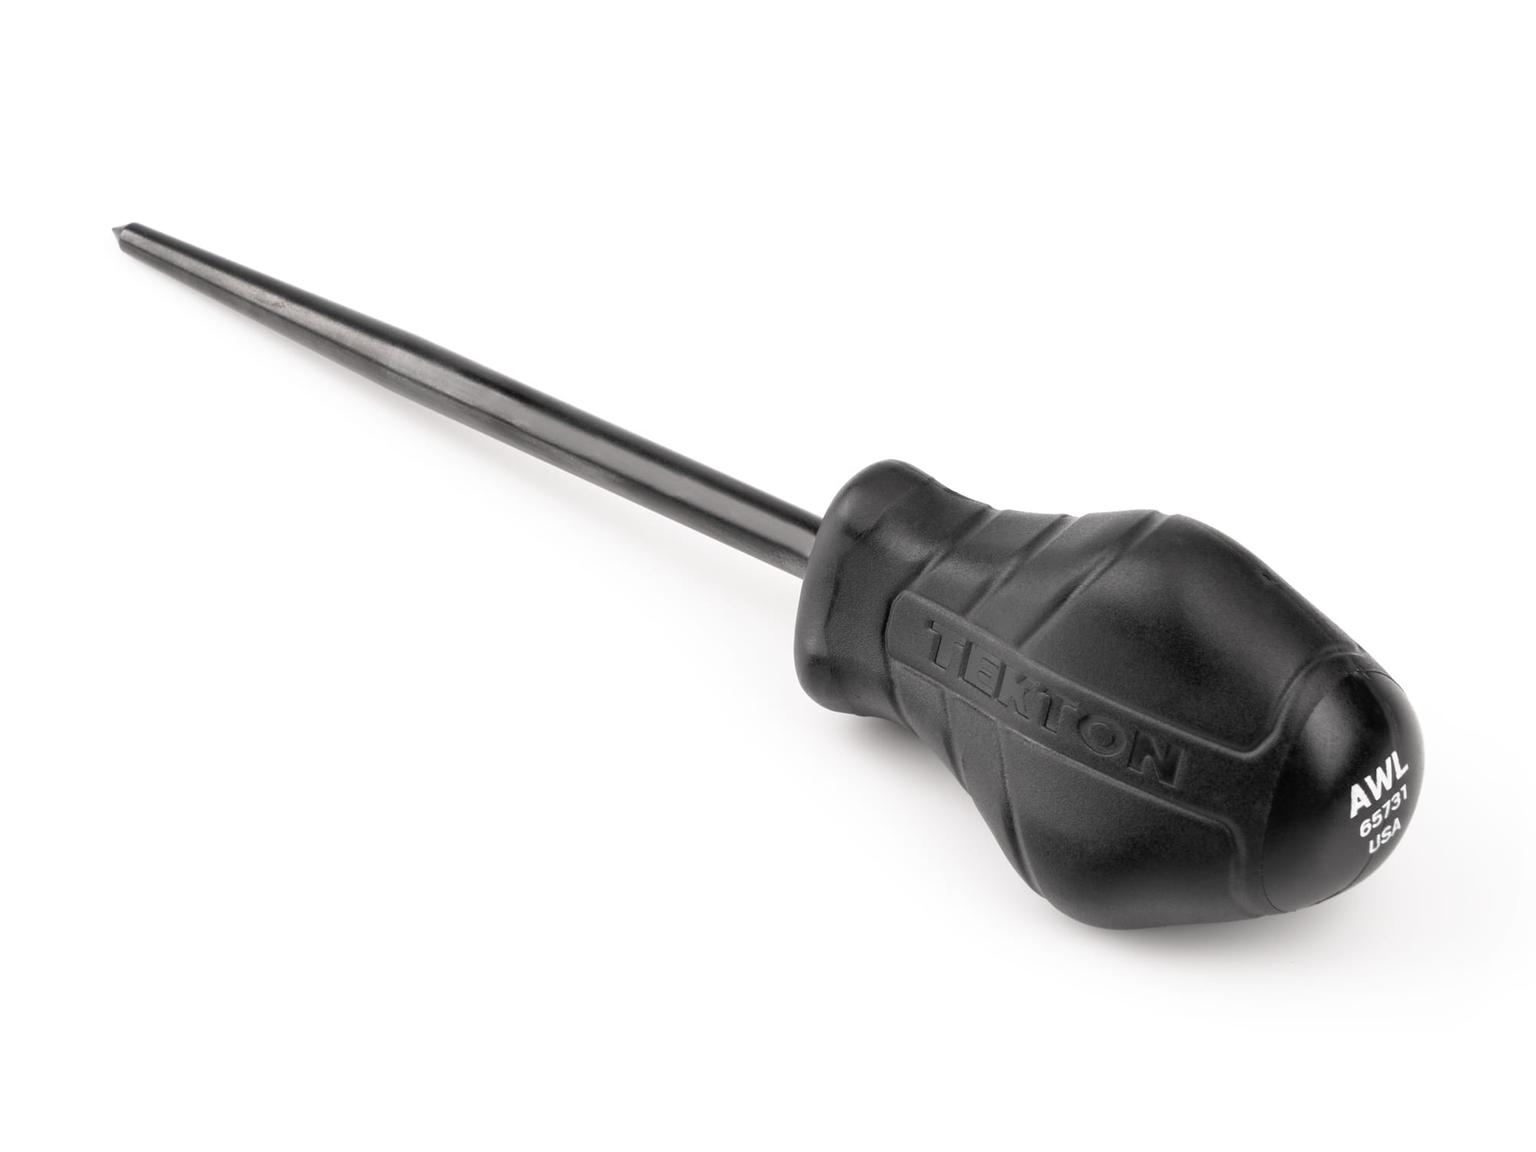 TEKTON 65731-T Scratch and Punch Awl with High-Torque Handle